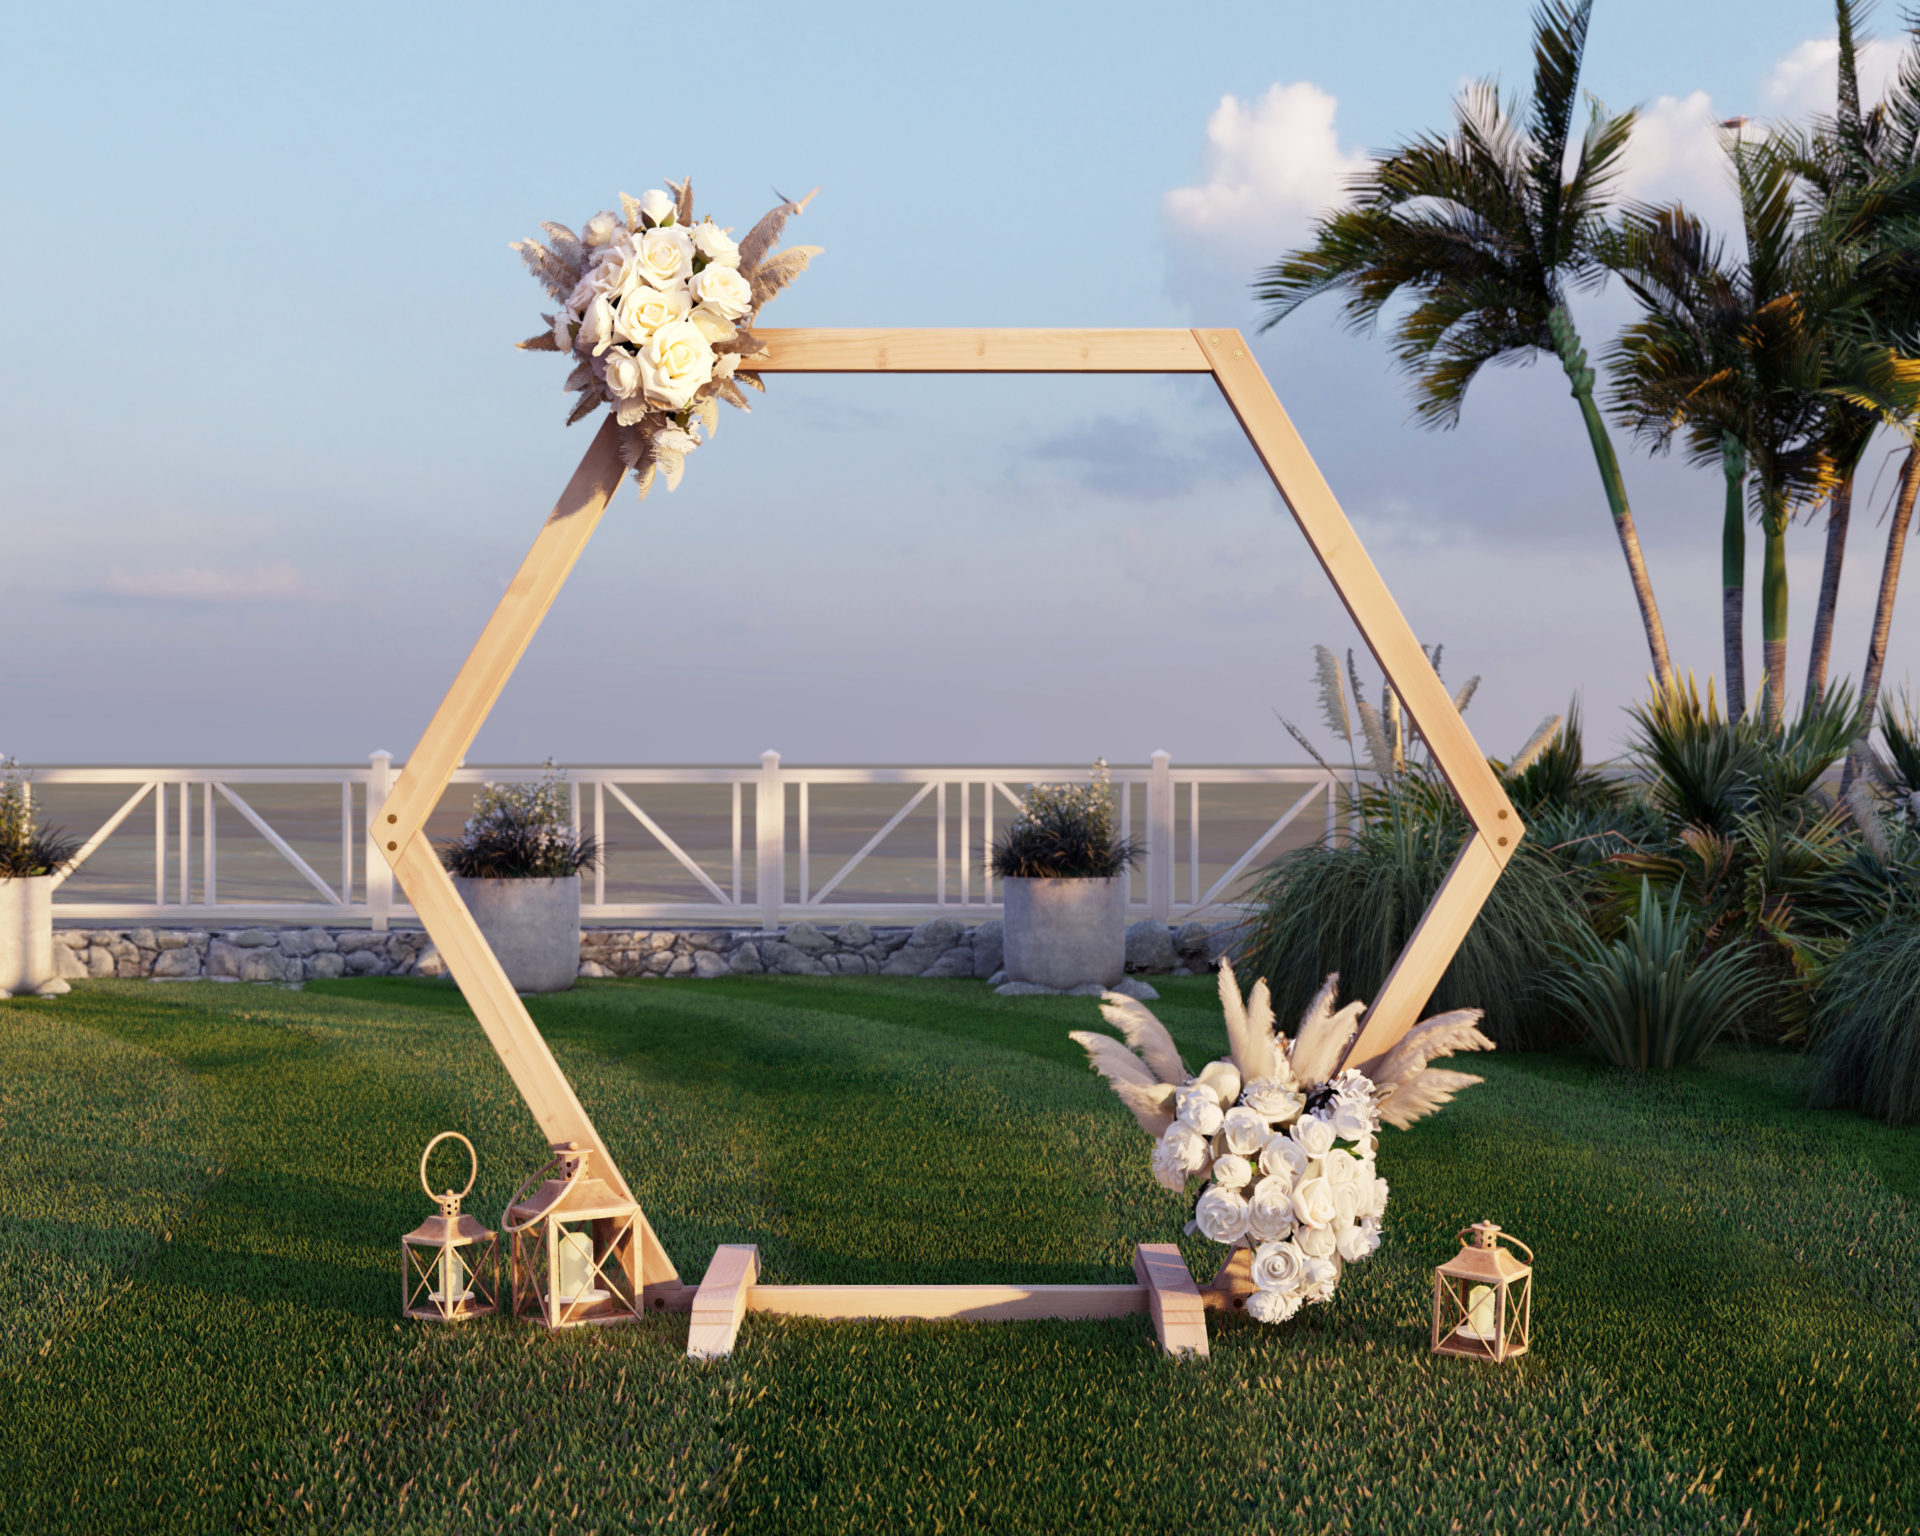 Portable Hexagon Wedding Arbor DIY Plans. Collapsible Arch Build  Instructions - DIY projects plans